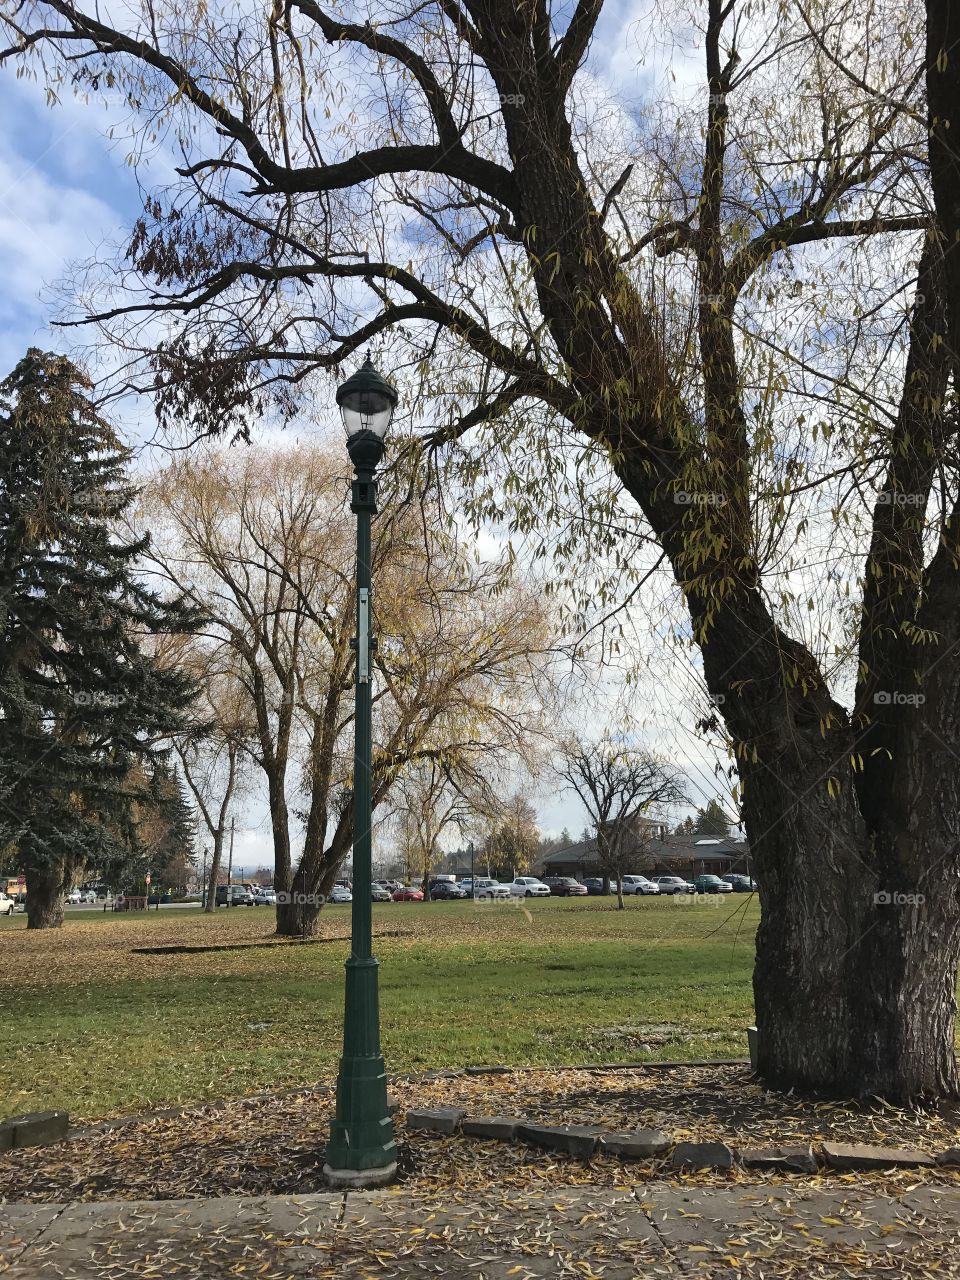 Lamppost by the park